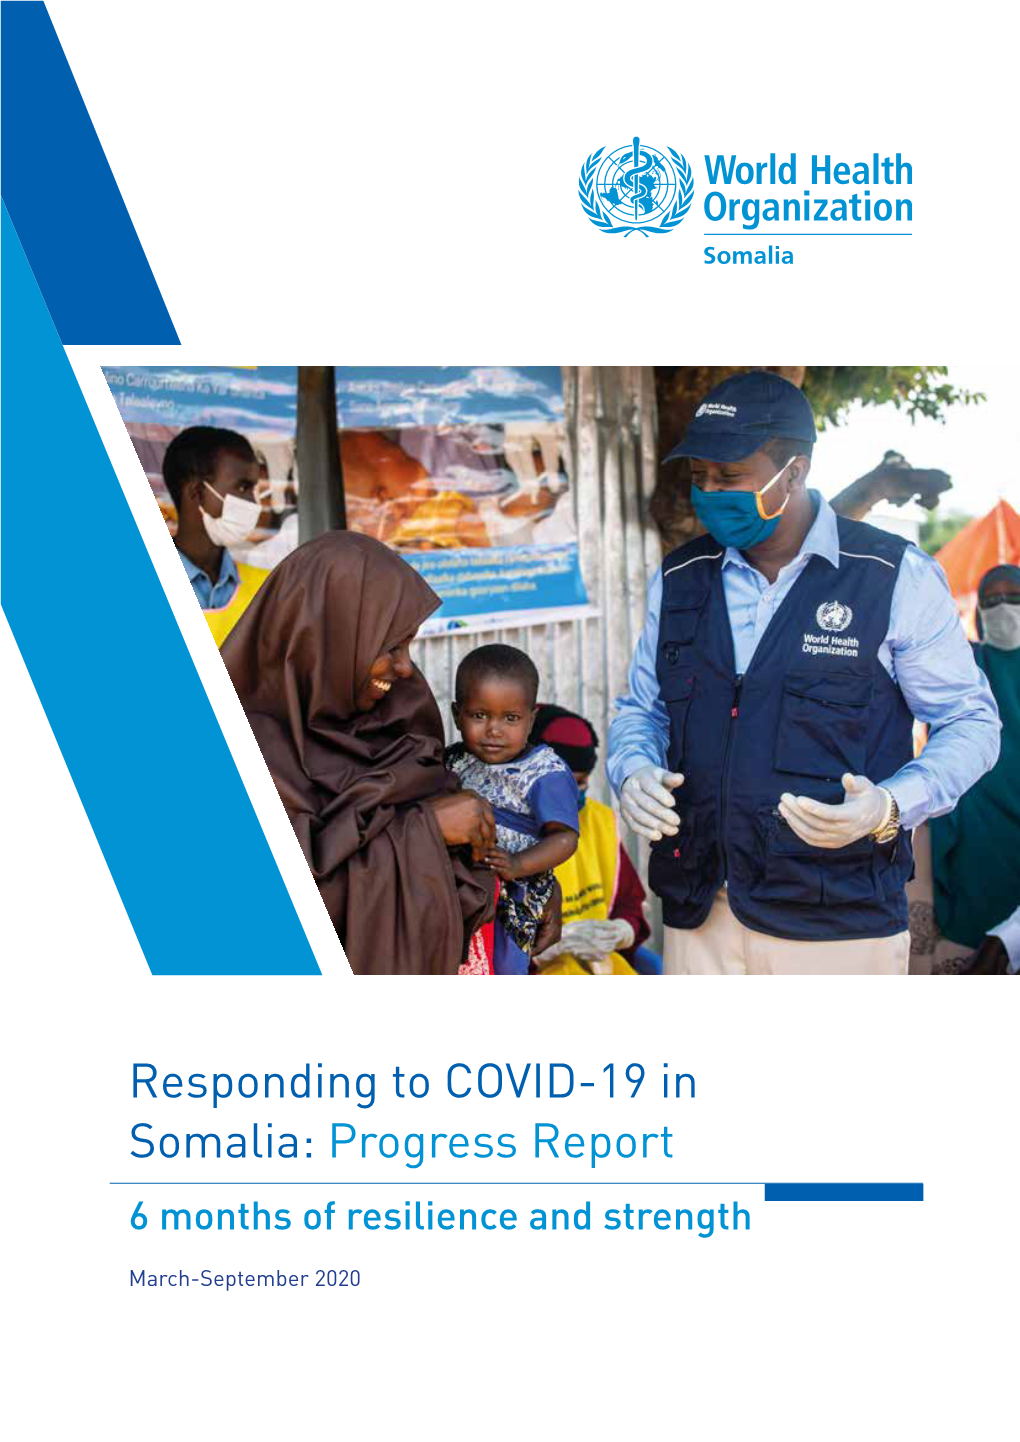 Responding to COVID-19 in Somalia: Progress Report 6 Months of Resilience and Strength